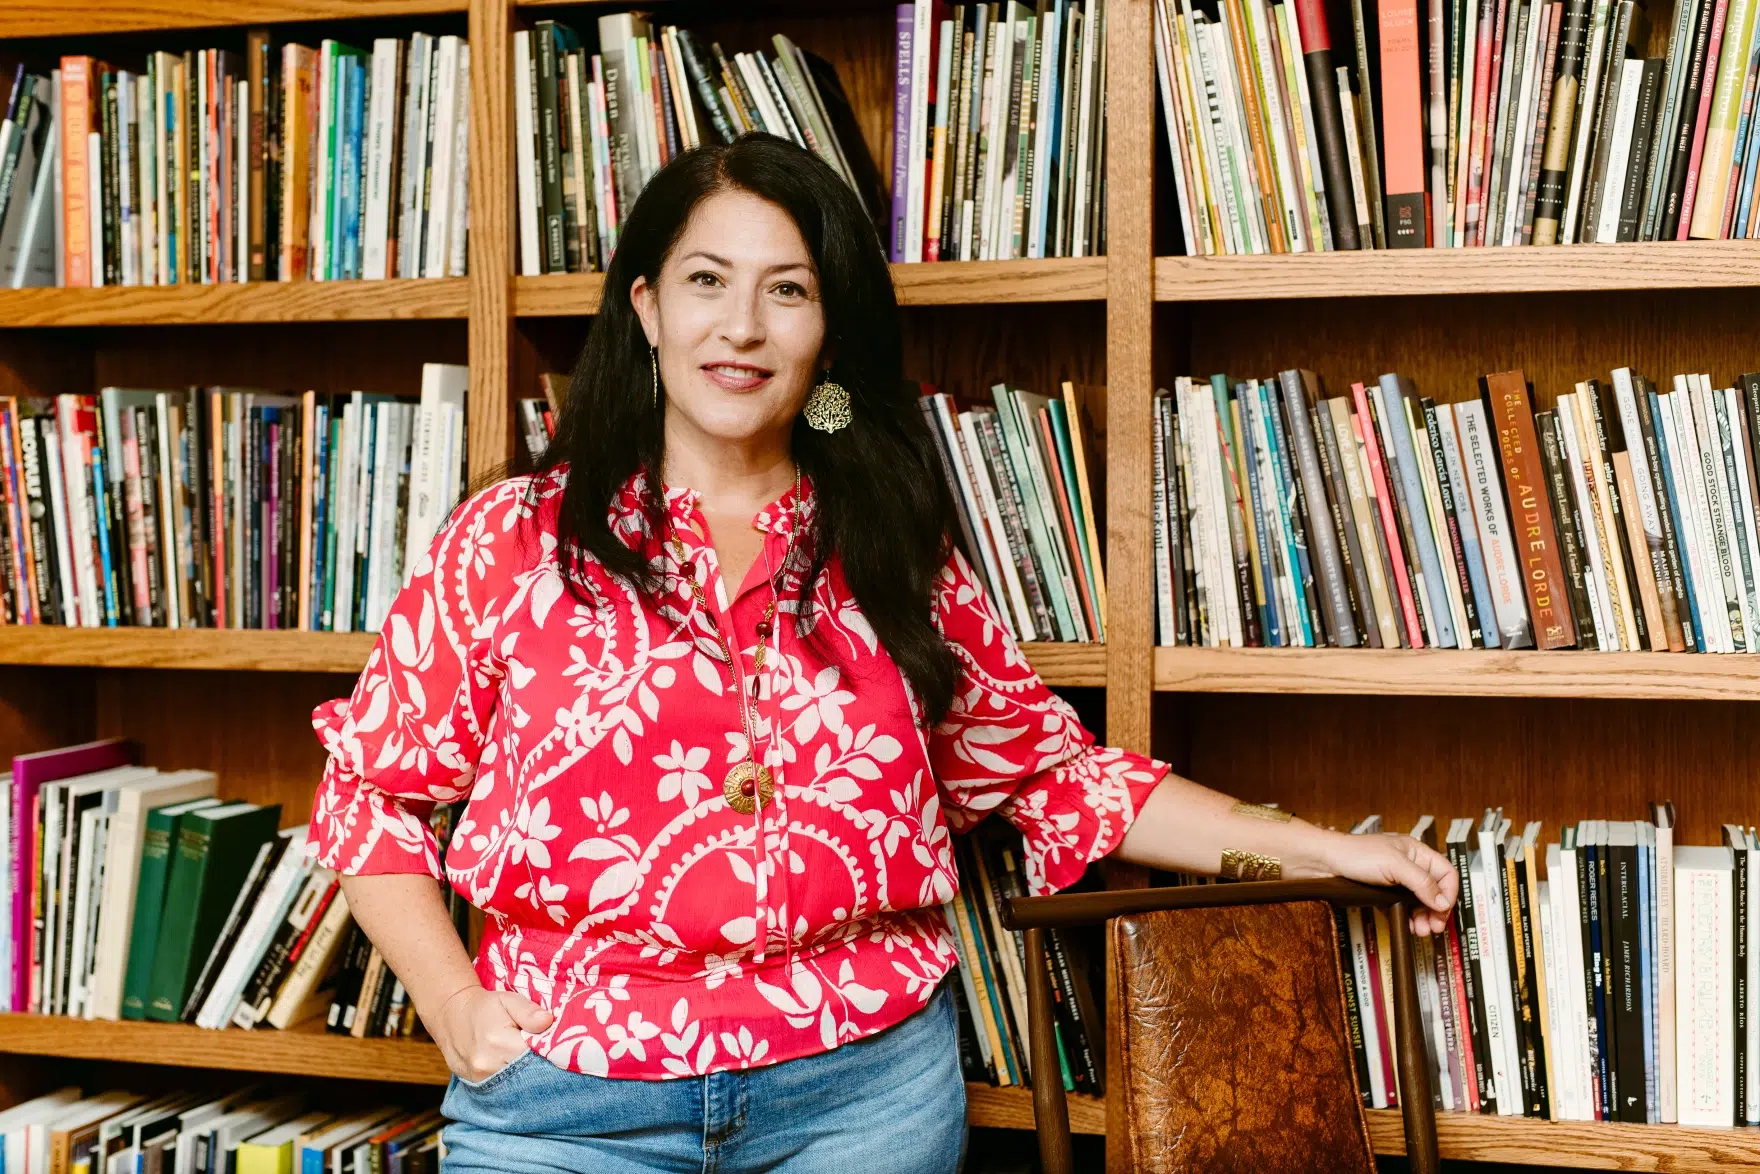 Ada Limón, the Kentucky-based writer who currently serves as the U.S. Poet Laureate, is among the 2023 class of The John D. and Catherine T. MacArthur Foundation's "genius grant" recipients. (MacArthur Foundation photo)